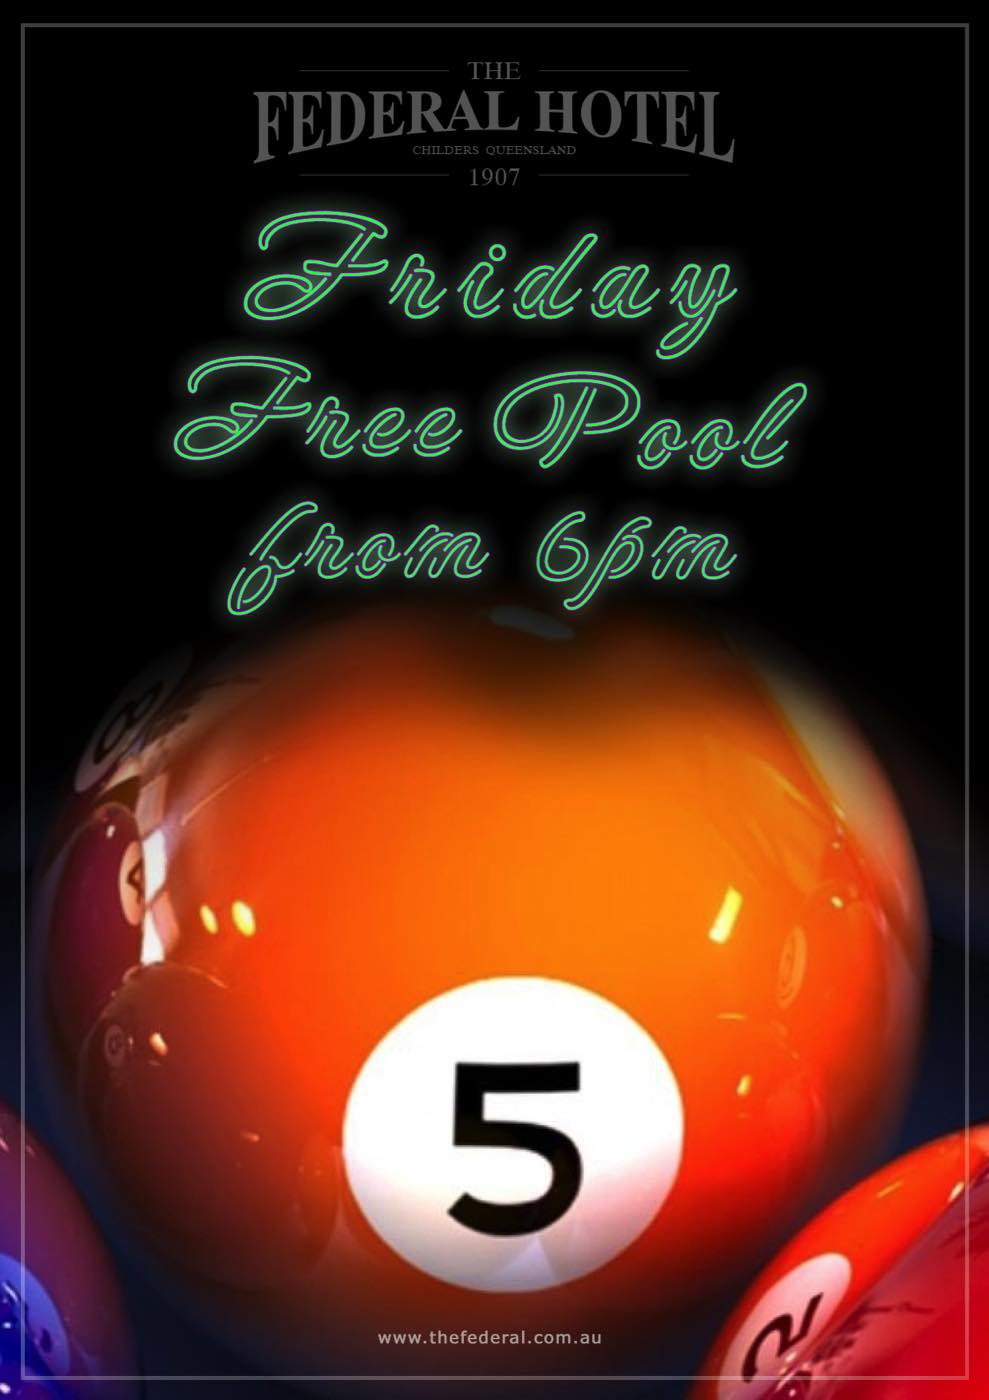 Friday Free Pool from 6pm